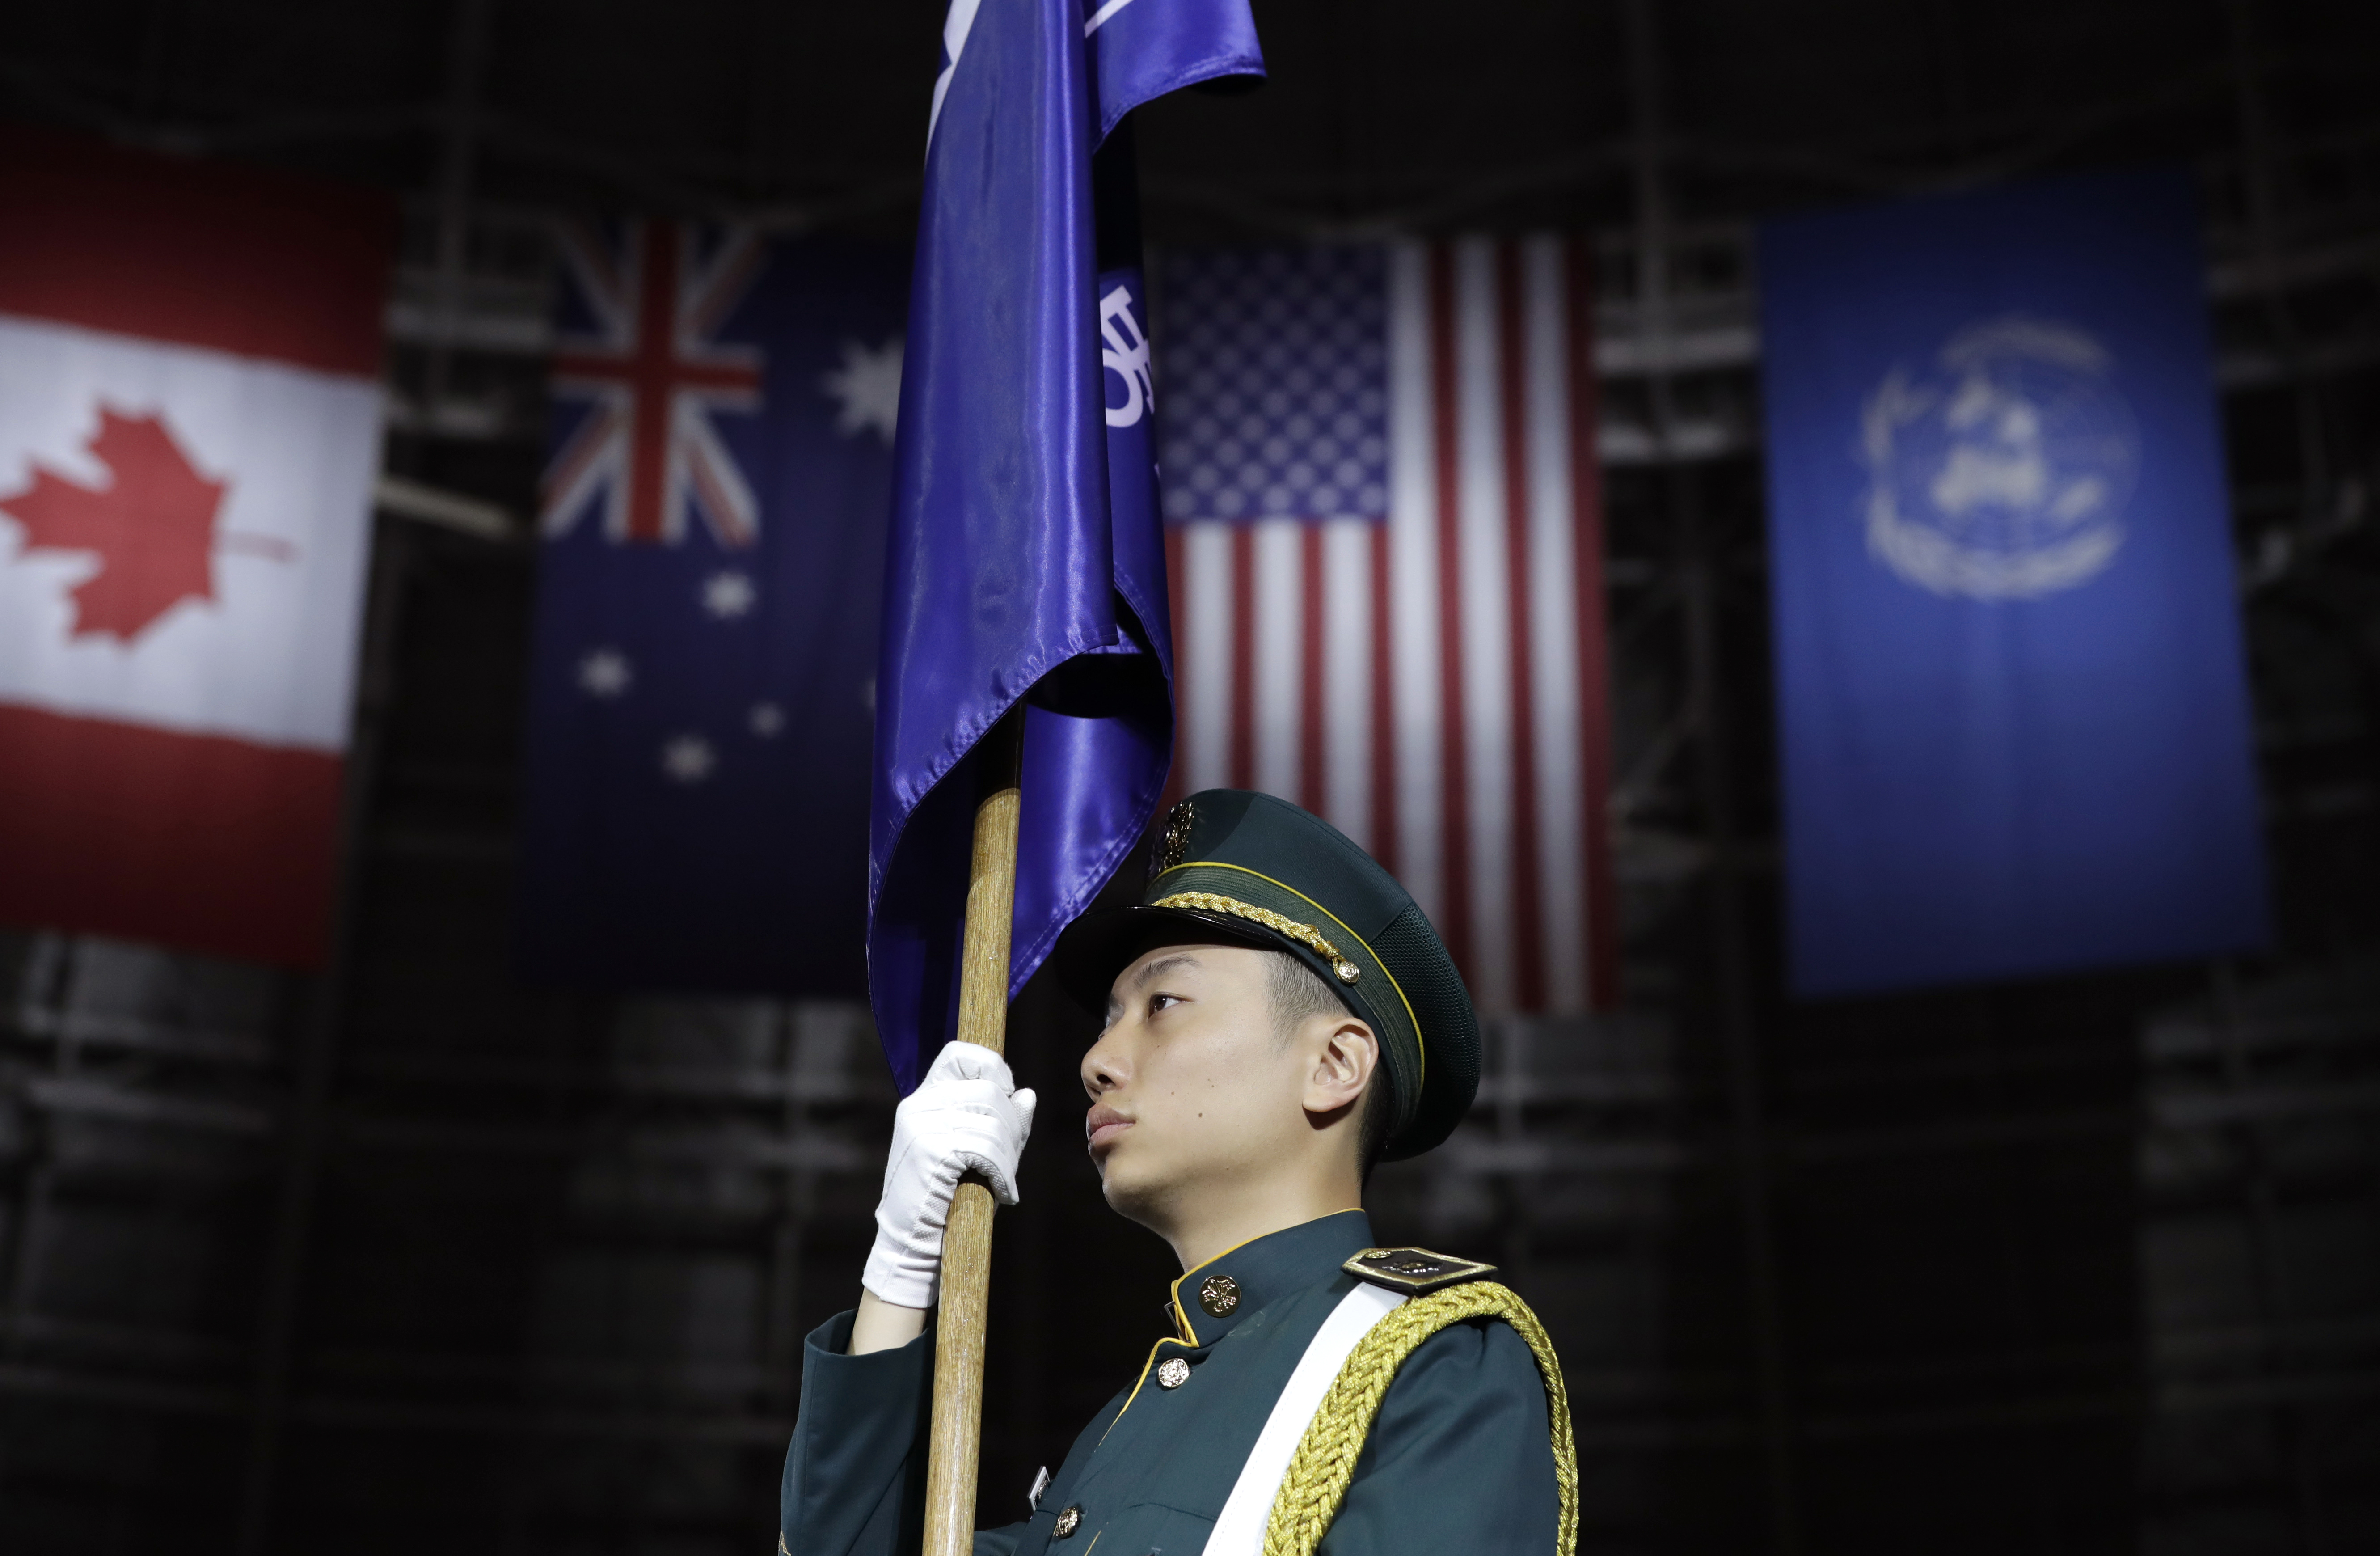 A South Korean honor guard soldier holds flag before a ceremony to mark the 69th anniversary of the outbreak of the Korean War in Seoul, South Korea, Tuesday, June 25, 2019. South Korea and North Korea fought a devastating three-year war in the early 1950s that ended with an armistice, not a peace treaty. (AP Photo/Lee Jin-man)